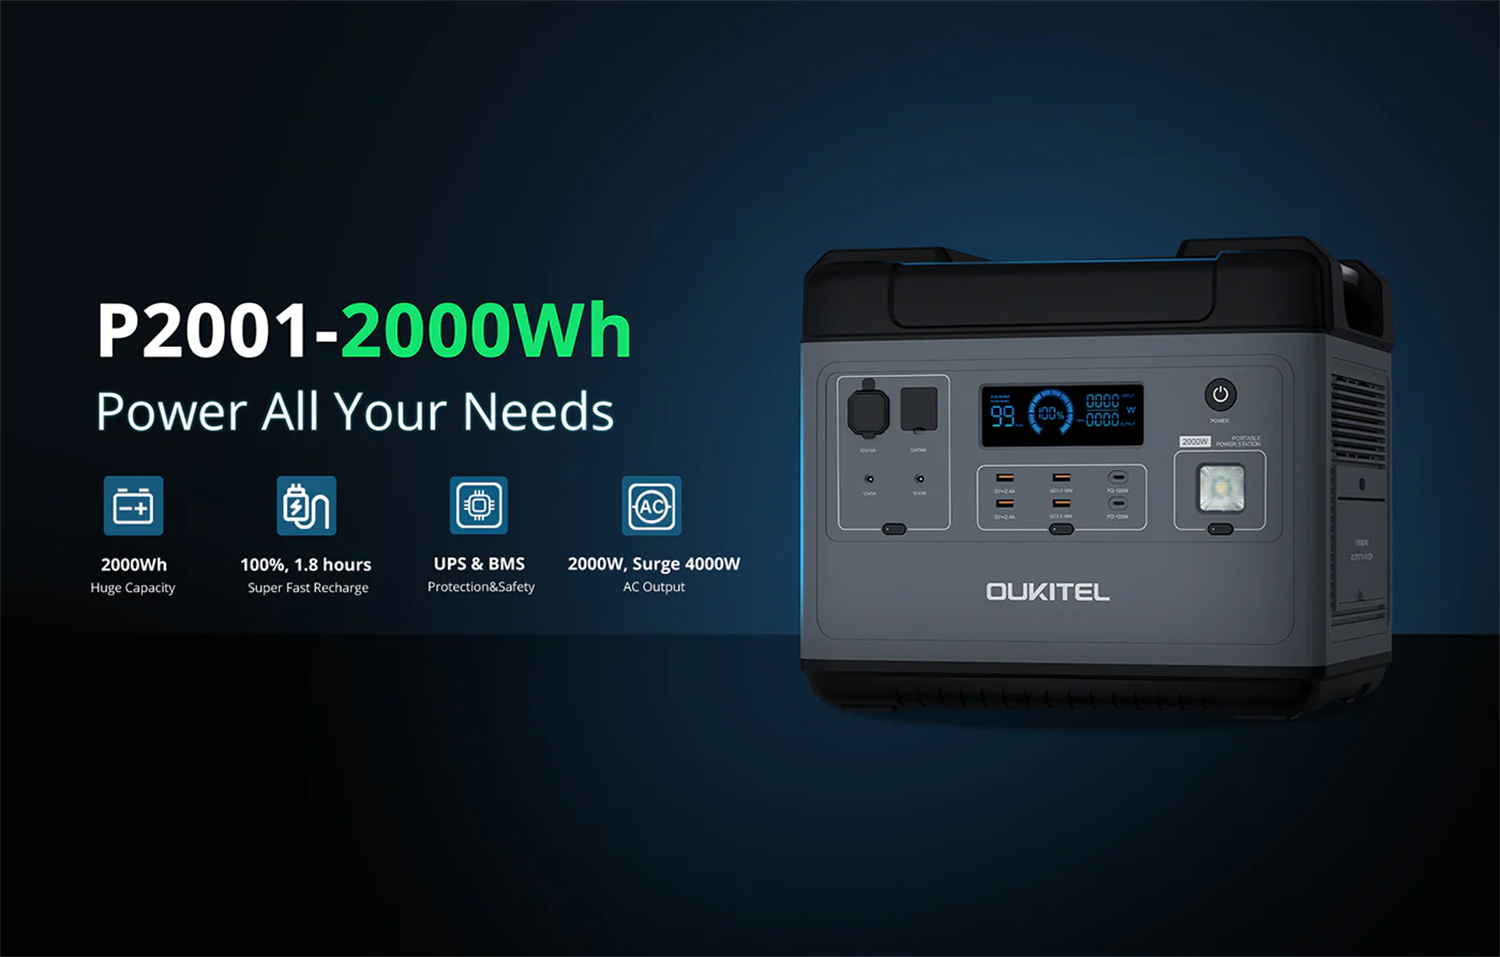 OUKITEL P2001 2000Wh 625000mAh Portable Power Station with 2000W AC Output